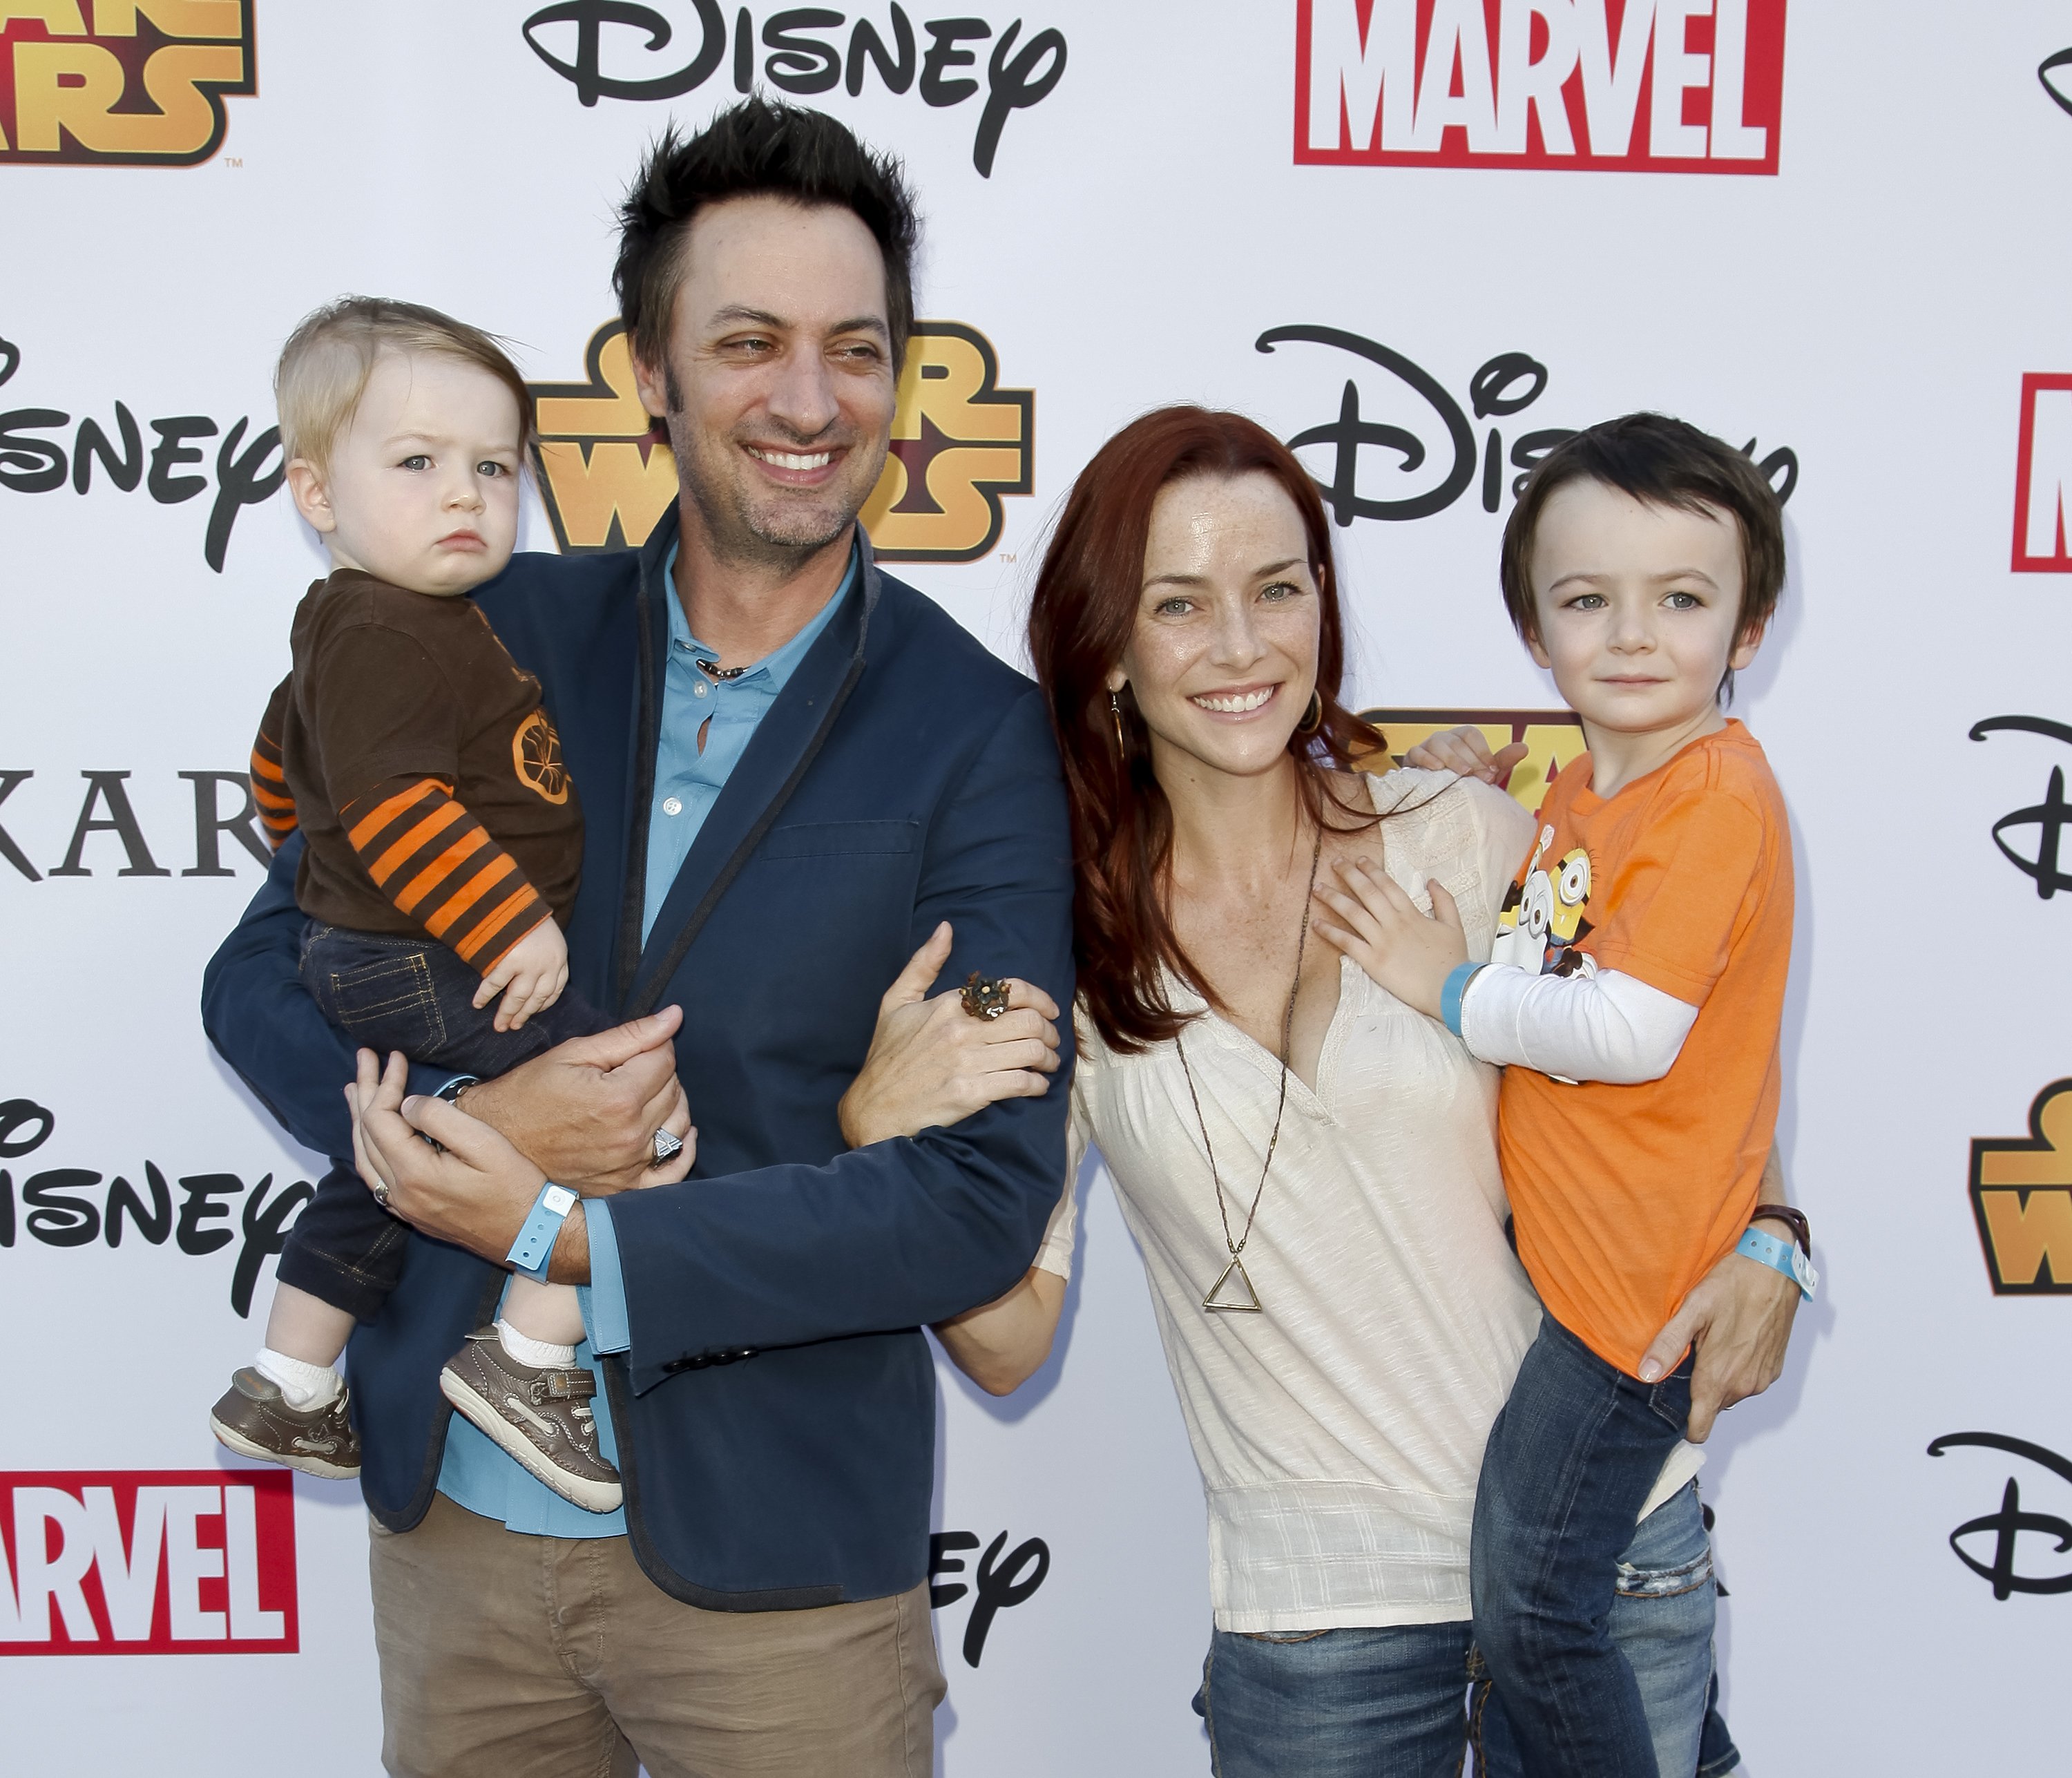 Stephen Full, Annie Wersching and their children attend the Disney's VIP Halloween event at Disney Consumer Products Campus on October 1, 2014, in Glendale, California. | Source: Getty Images